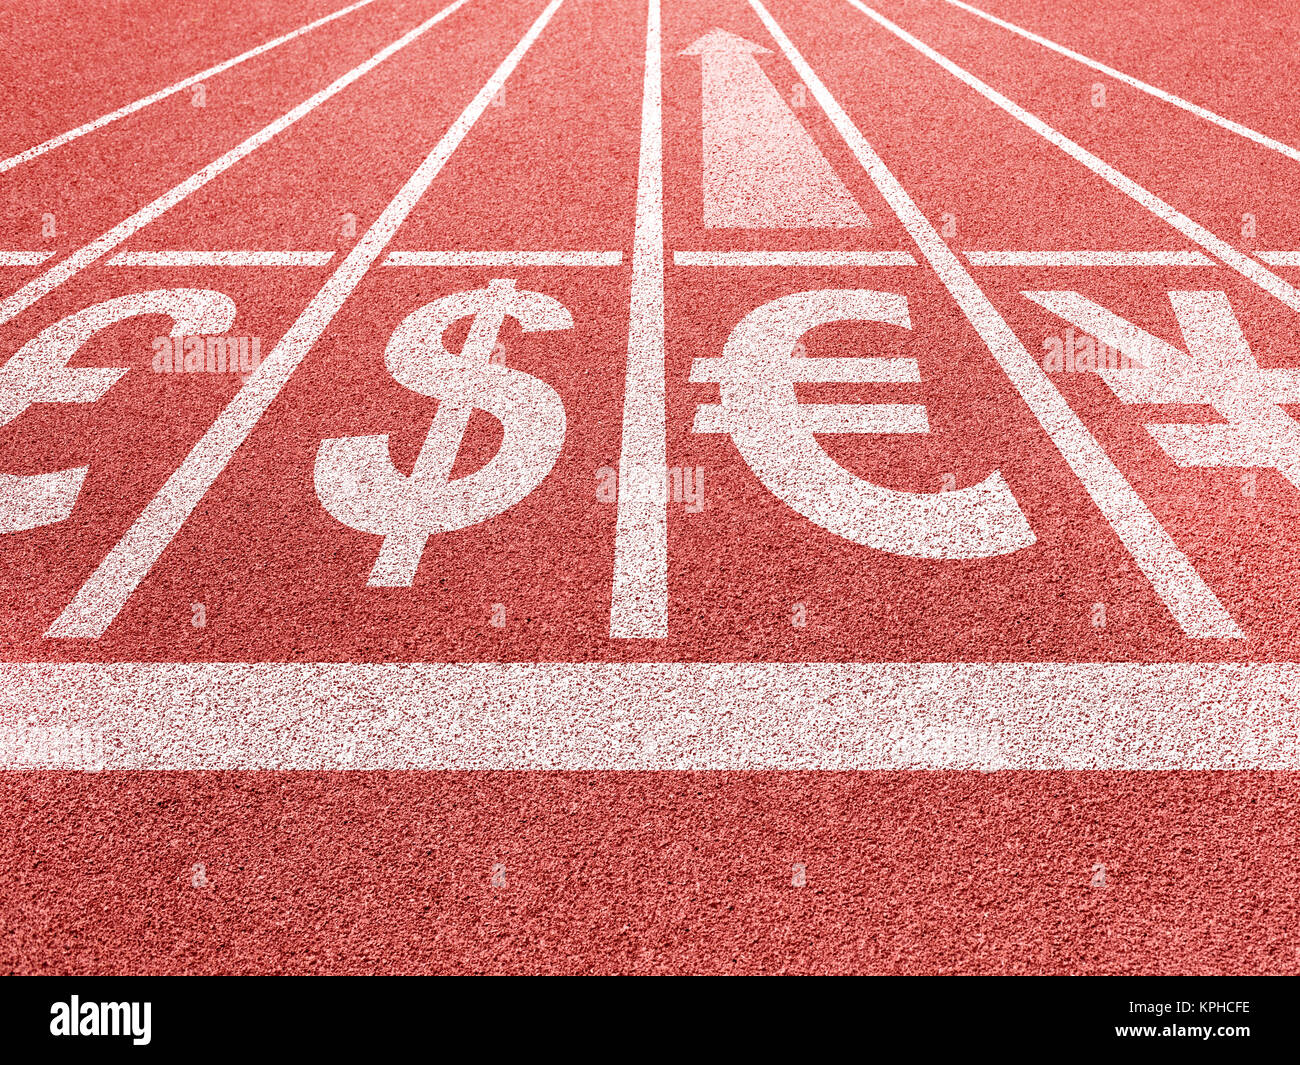 Euro growing. Currencies symbols on running trace start. Stock Photo